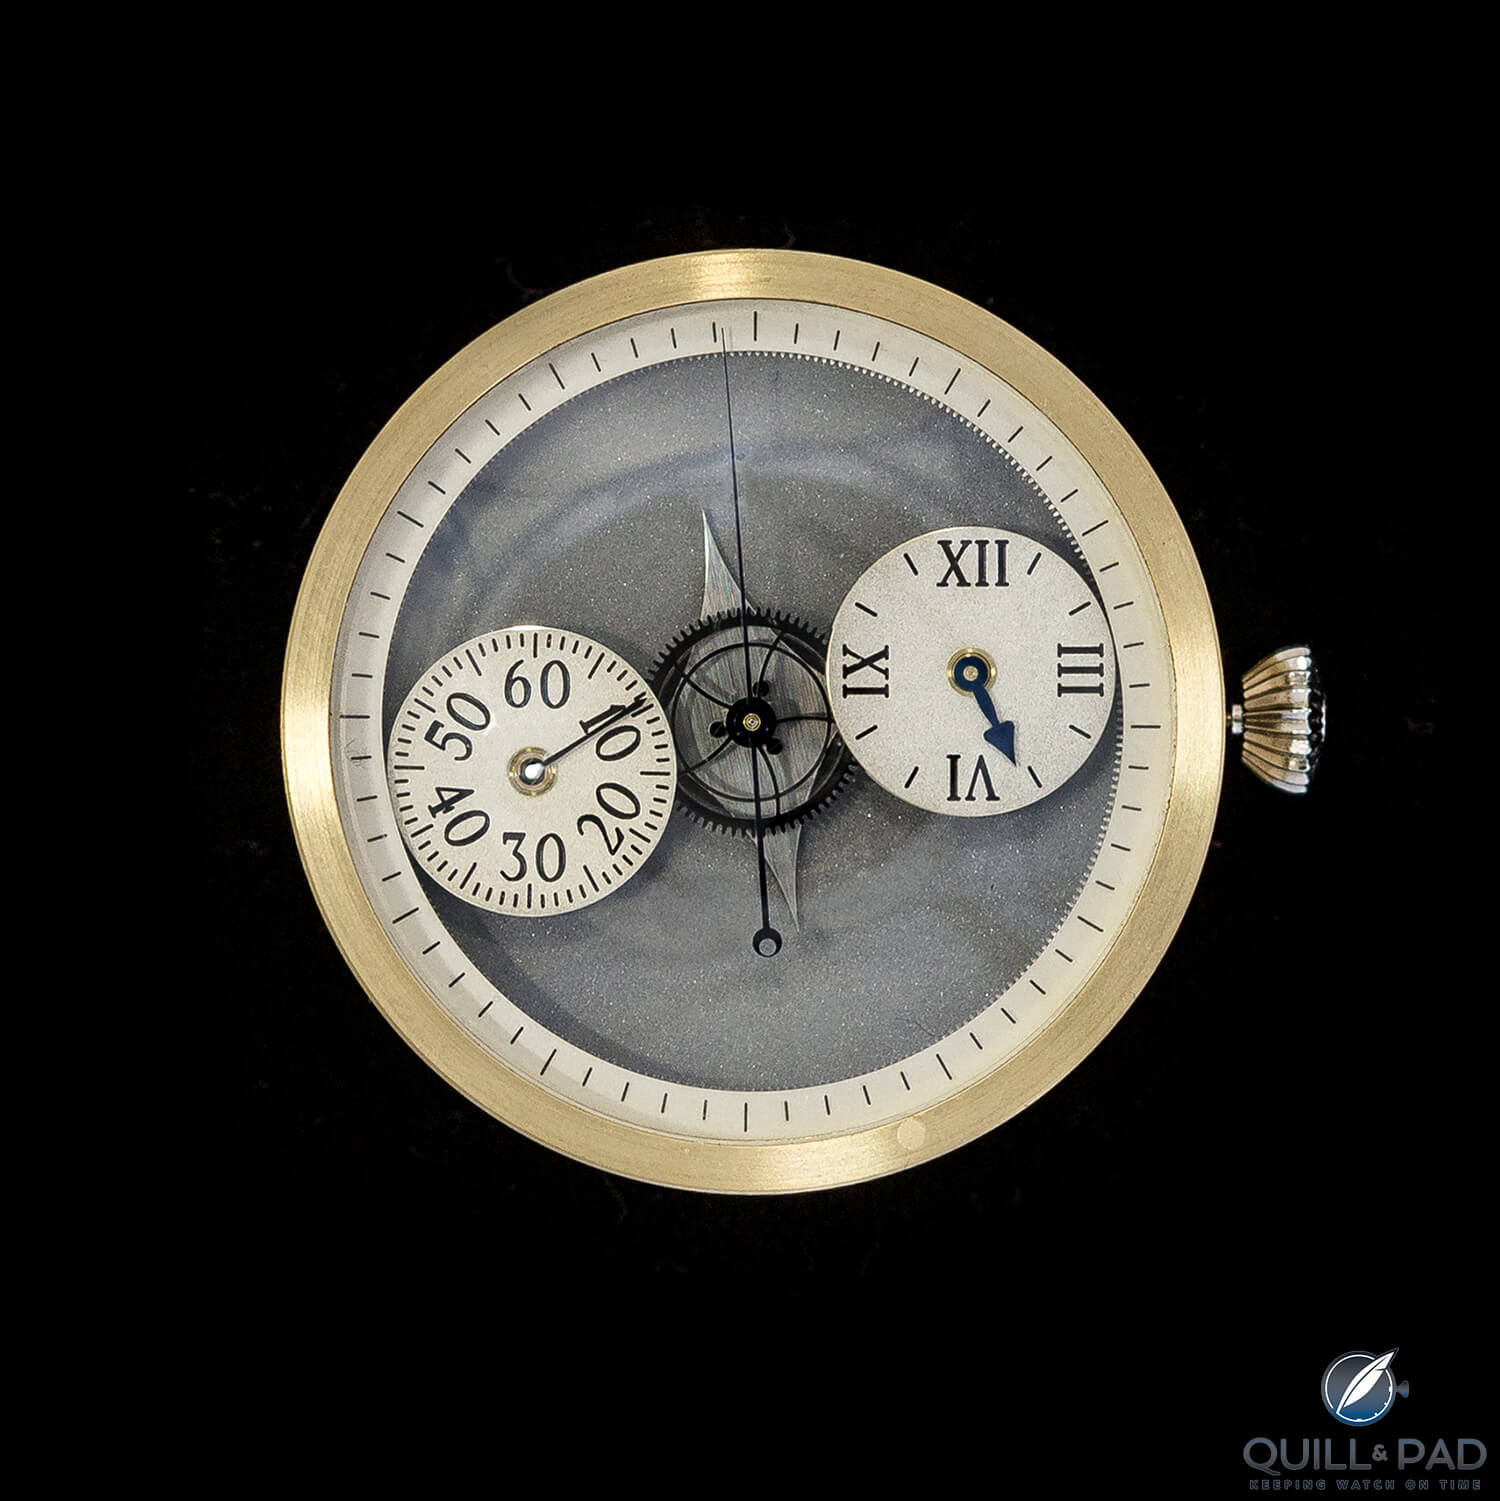 Watch by F.A. Lange Watchmaking Excellence Award finalist Veit Rothaupt from Glashütte, Germany